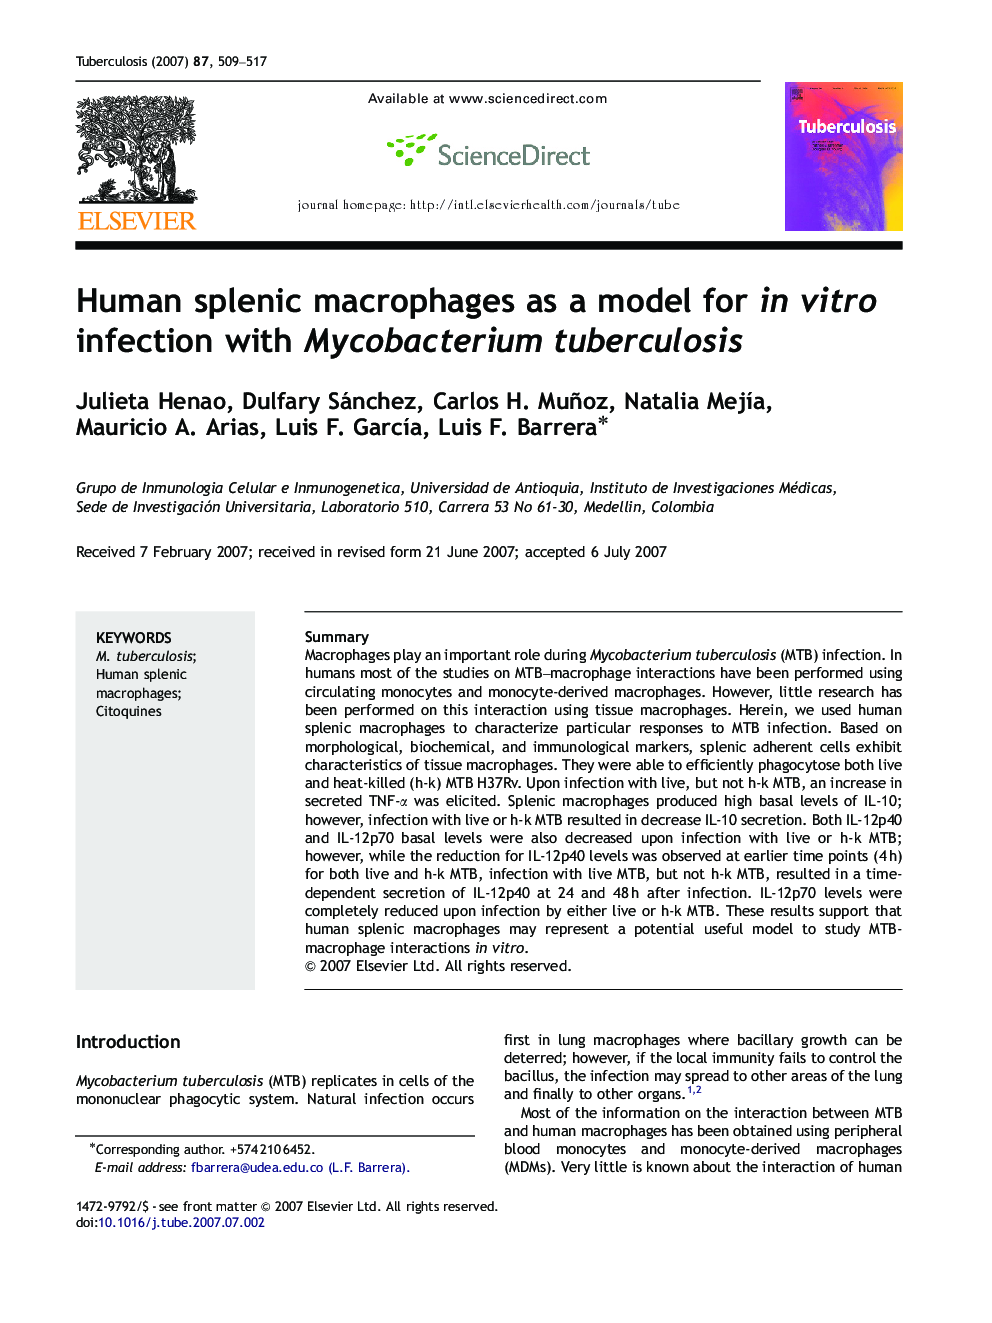 Human splenic macrophages as a model for in vitro infection with Mycobacterium tuberculosis